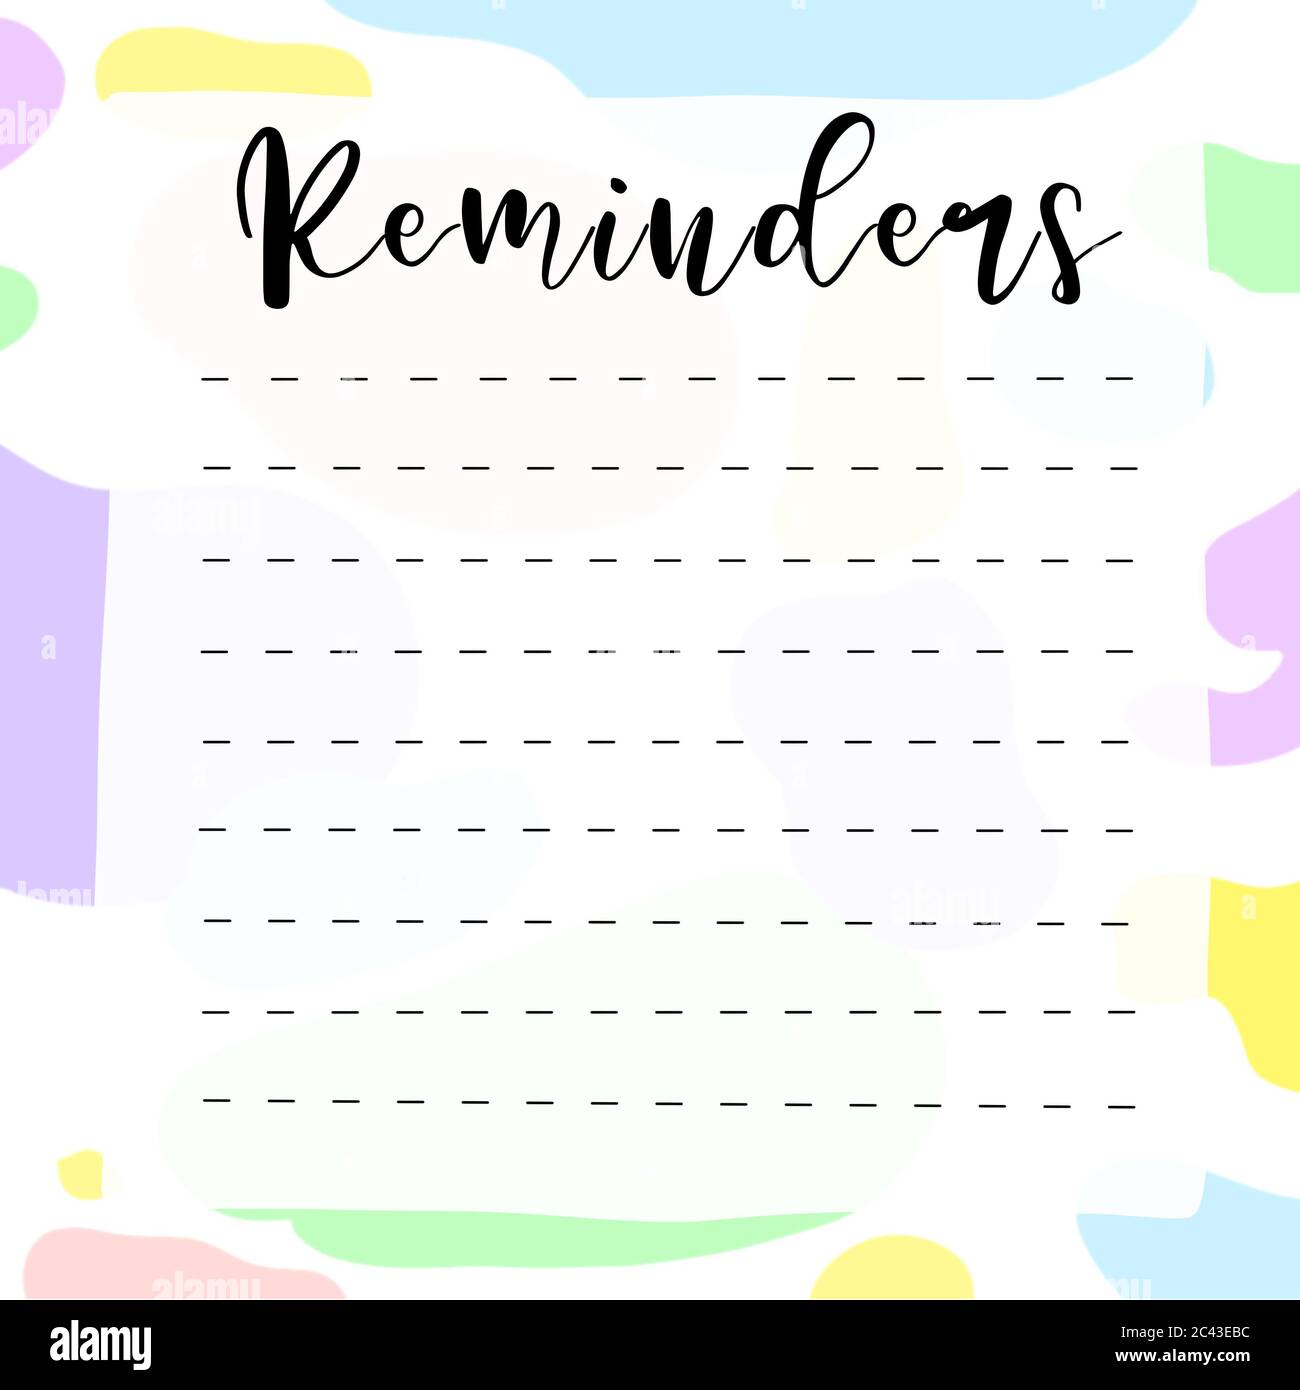 Personal daily, weekly, monthly digital planners or printable organizer